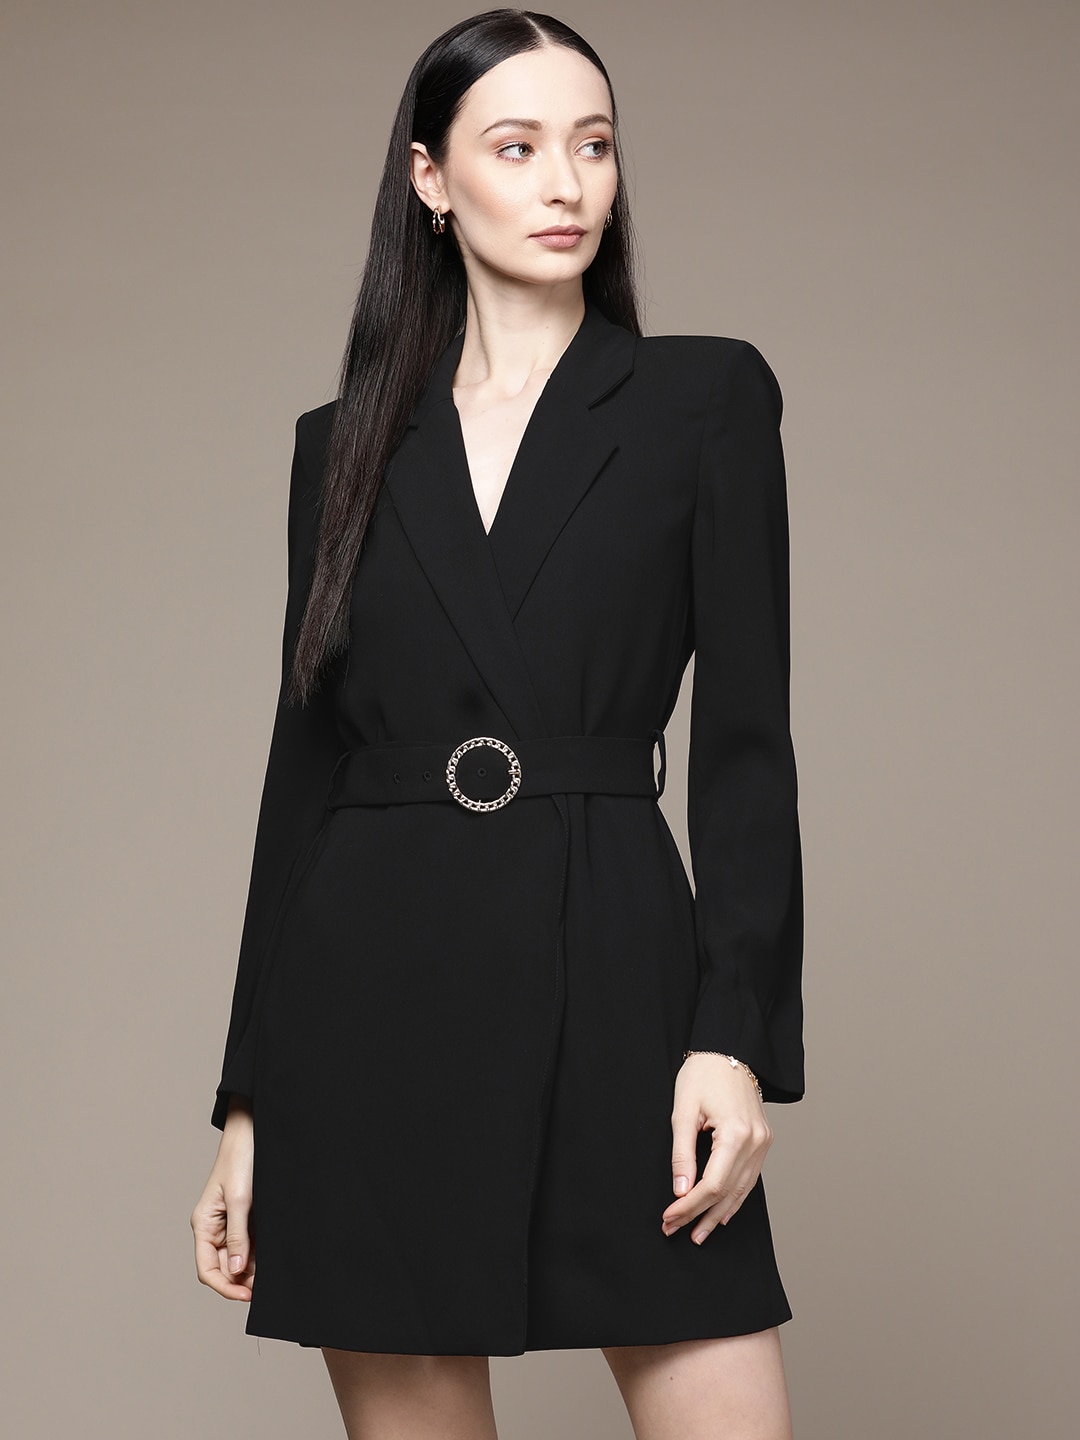 MANGO Black Solid Sustainable Blazer Dress with a Belt Price in India